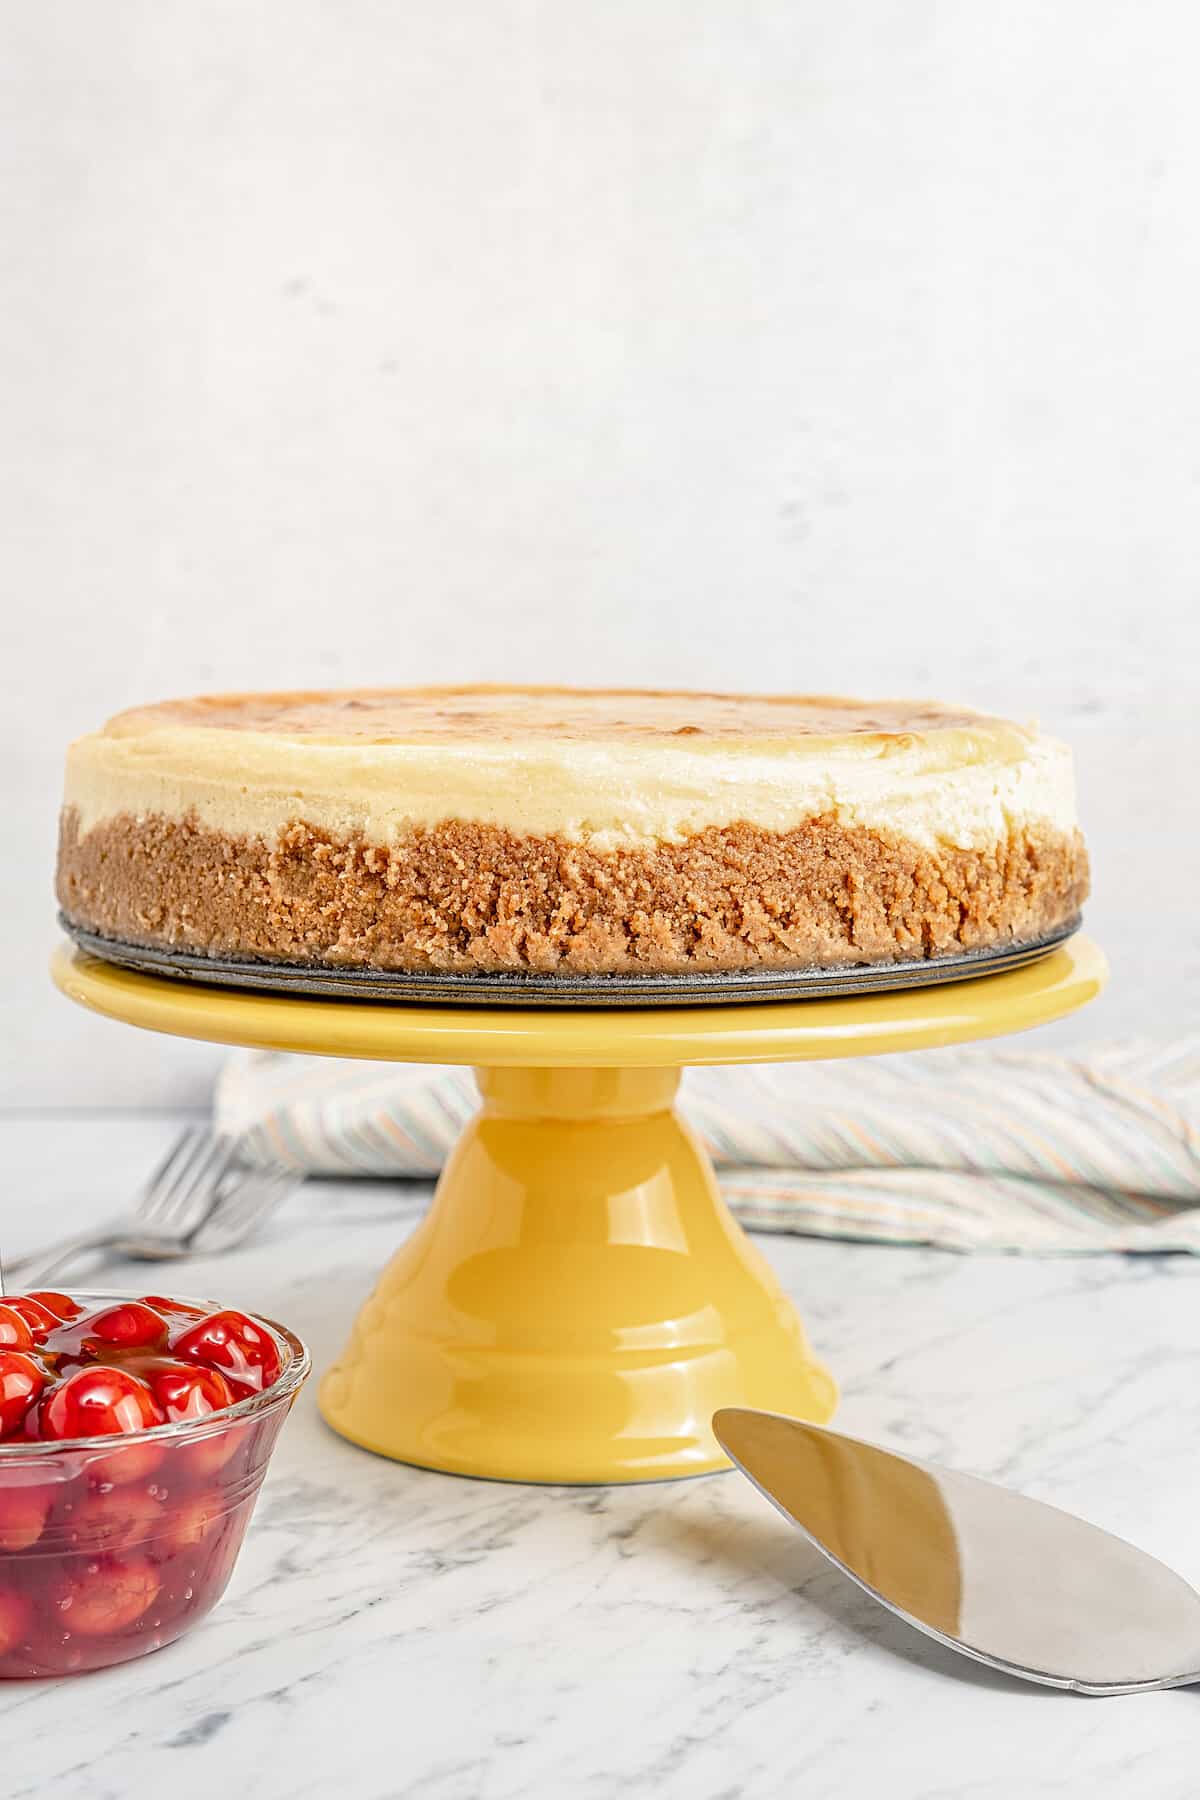 A classic gluten-free cheesecake on a yellow cake stand next to a bowl of cherries.